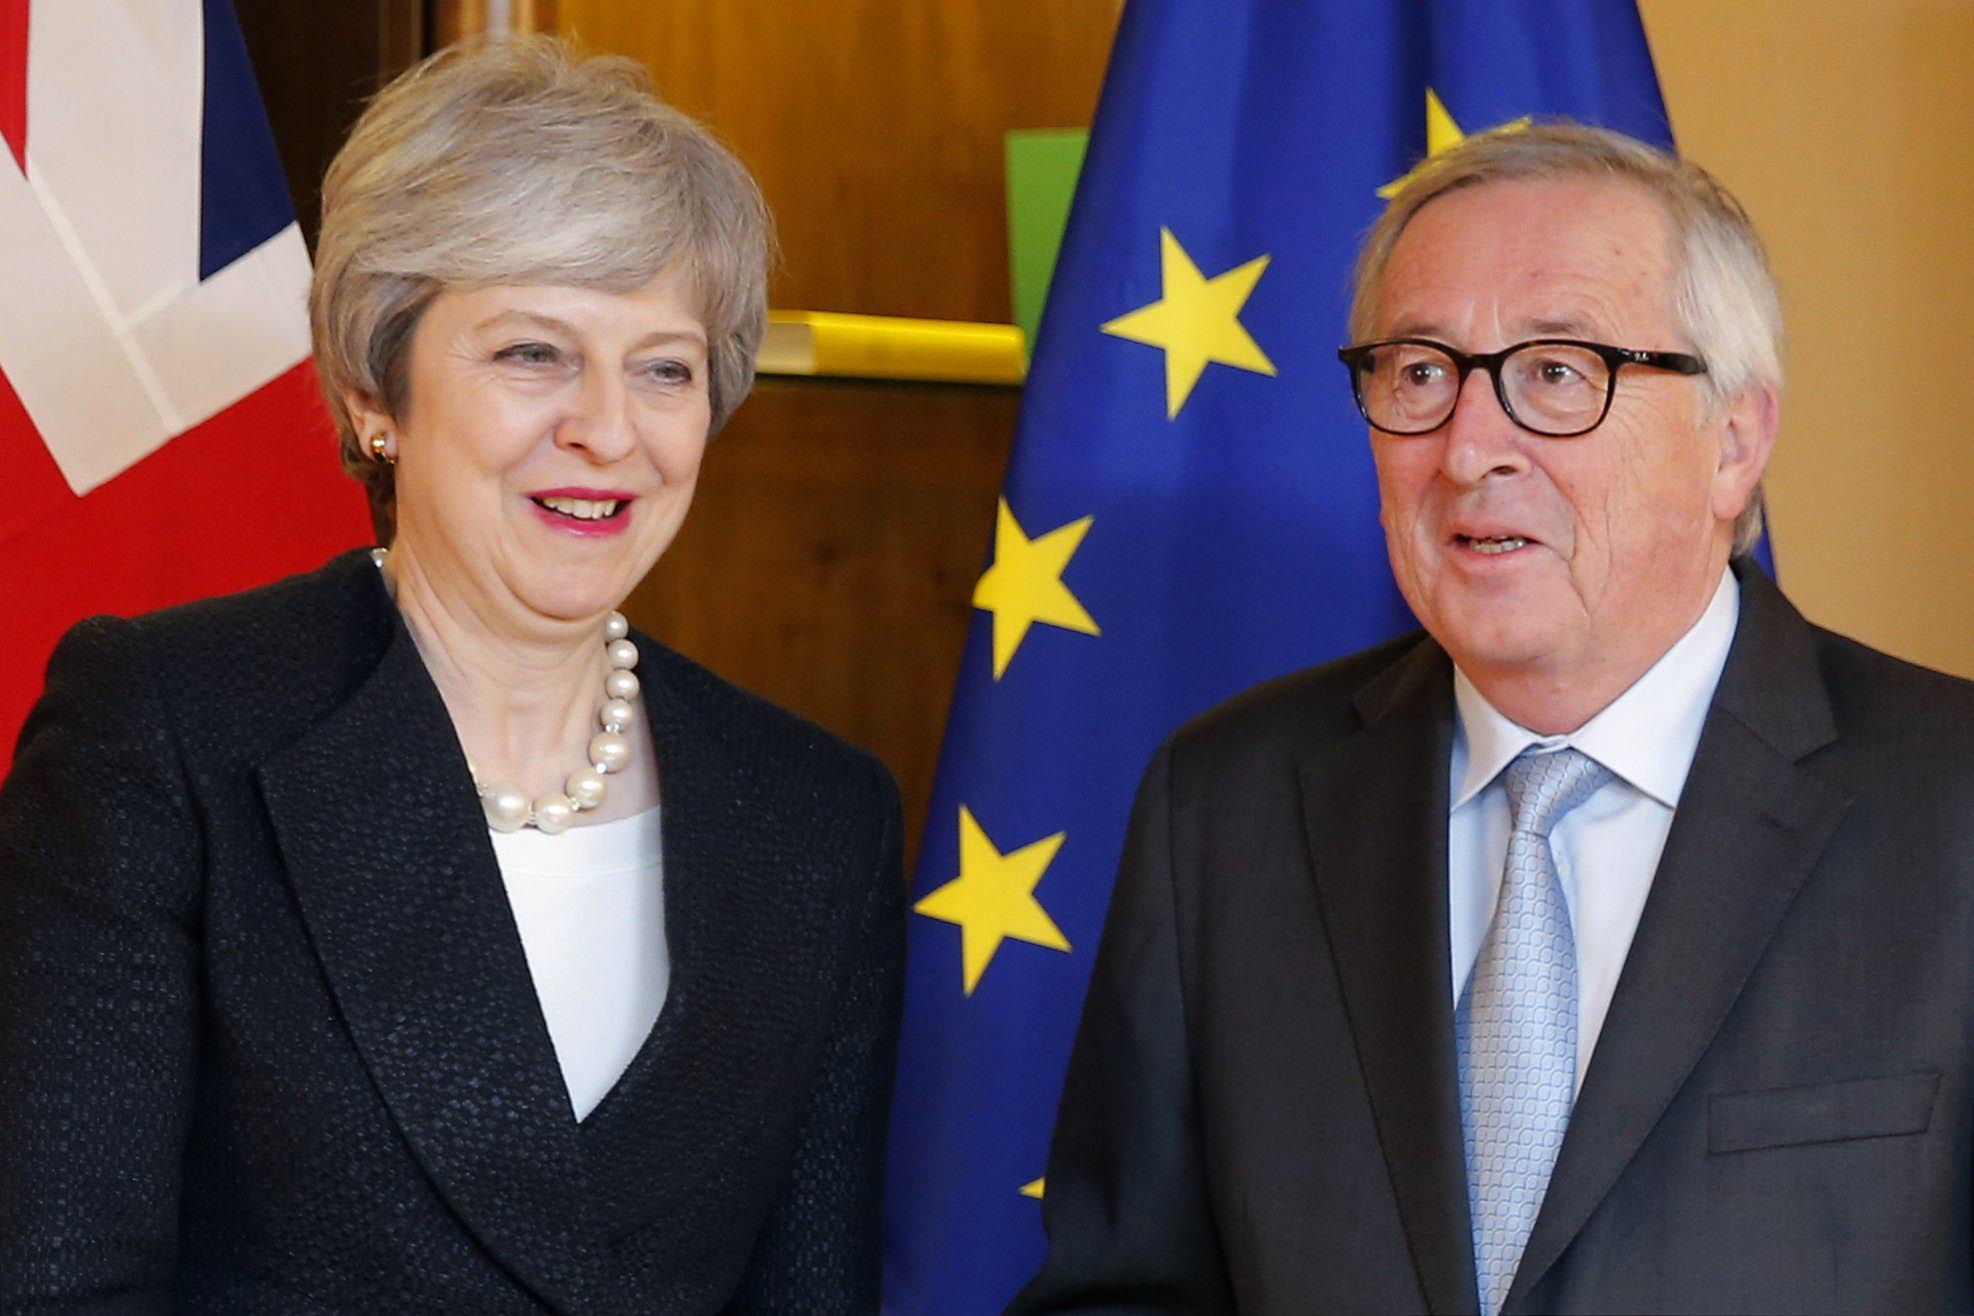 British Prime Minister Theresa May, left, poses for the media with European Commission President Jean-Claude Juncker in Strasbourg, France, Monday, March 11, 2019. Photo: AP